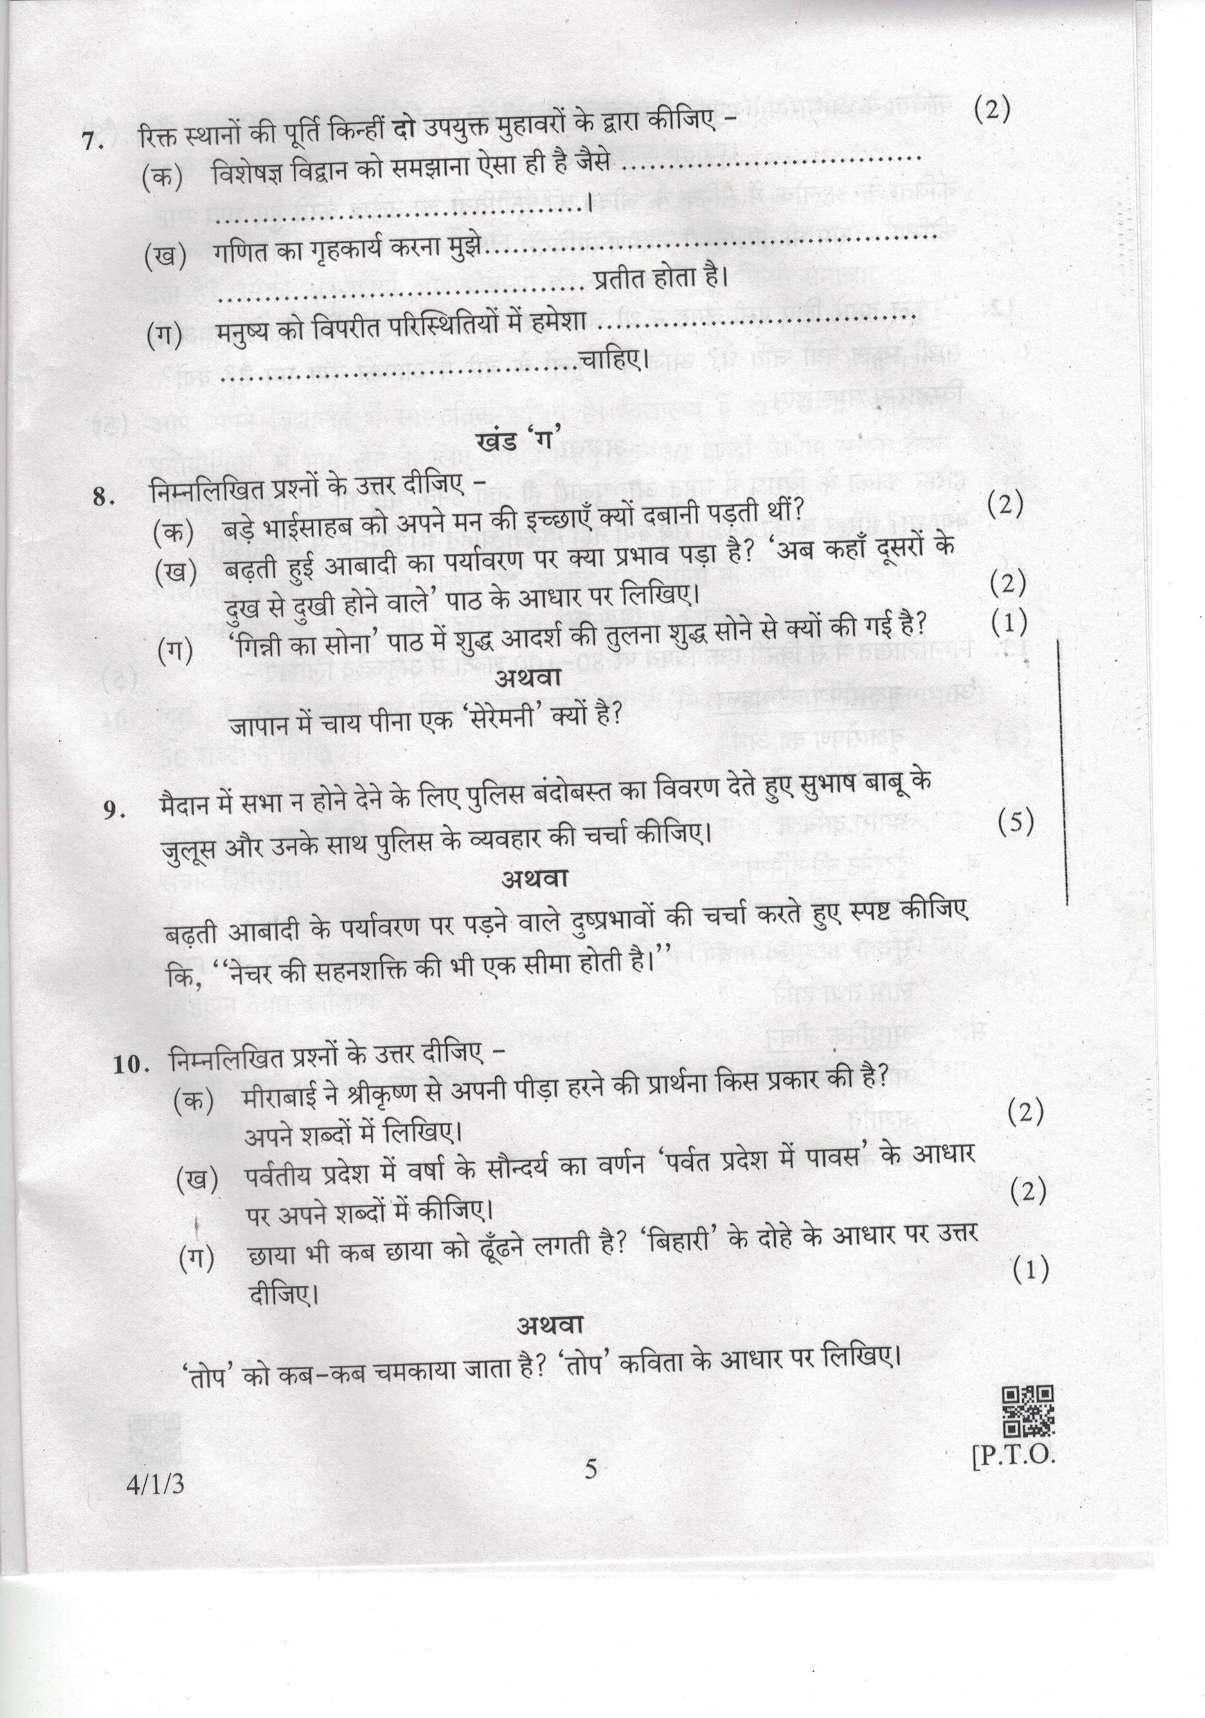 CBSE Class 10 4-1-3 Hindi-B 2019 Question Paper - Page 5